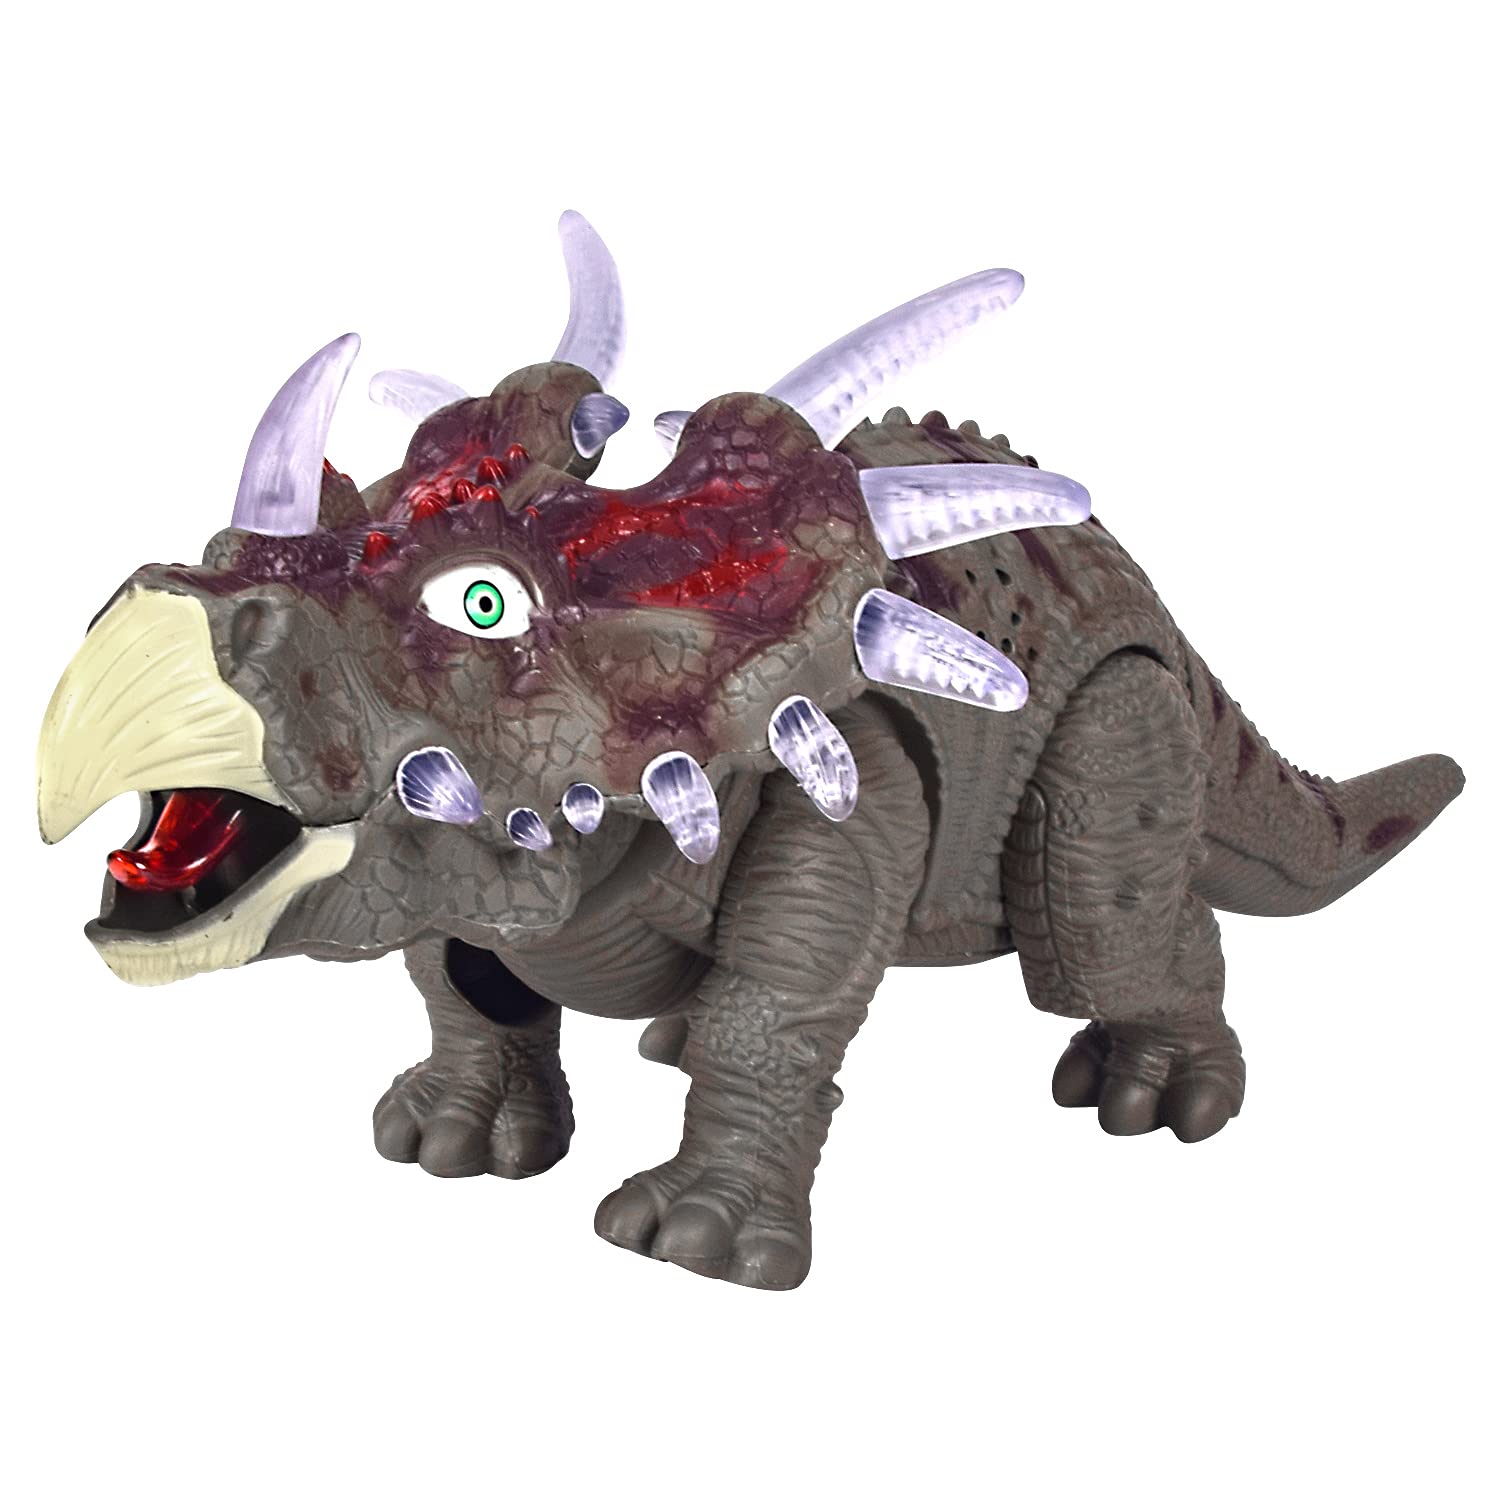 Walking Electronic Triceratops Dinosaur Toys, Realistic Walking Robot Dino Toys with Roaring Sound and LED Light Up for 3-5+ Years Old Kids, Boys and Girls Birthday Gift